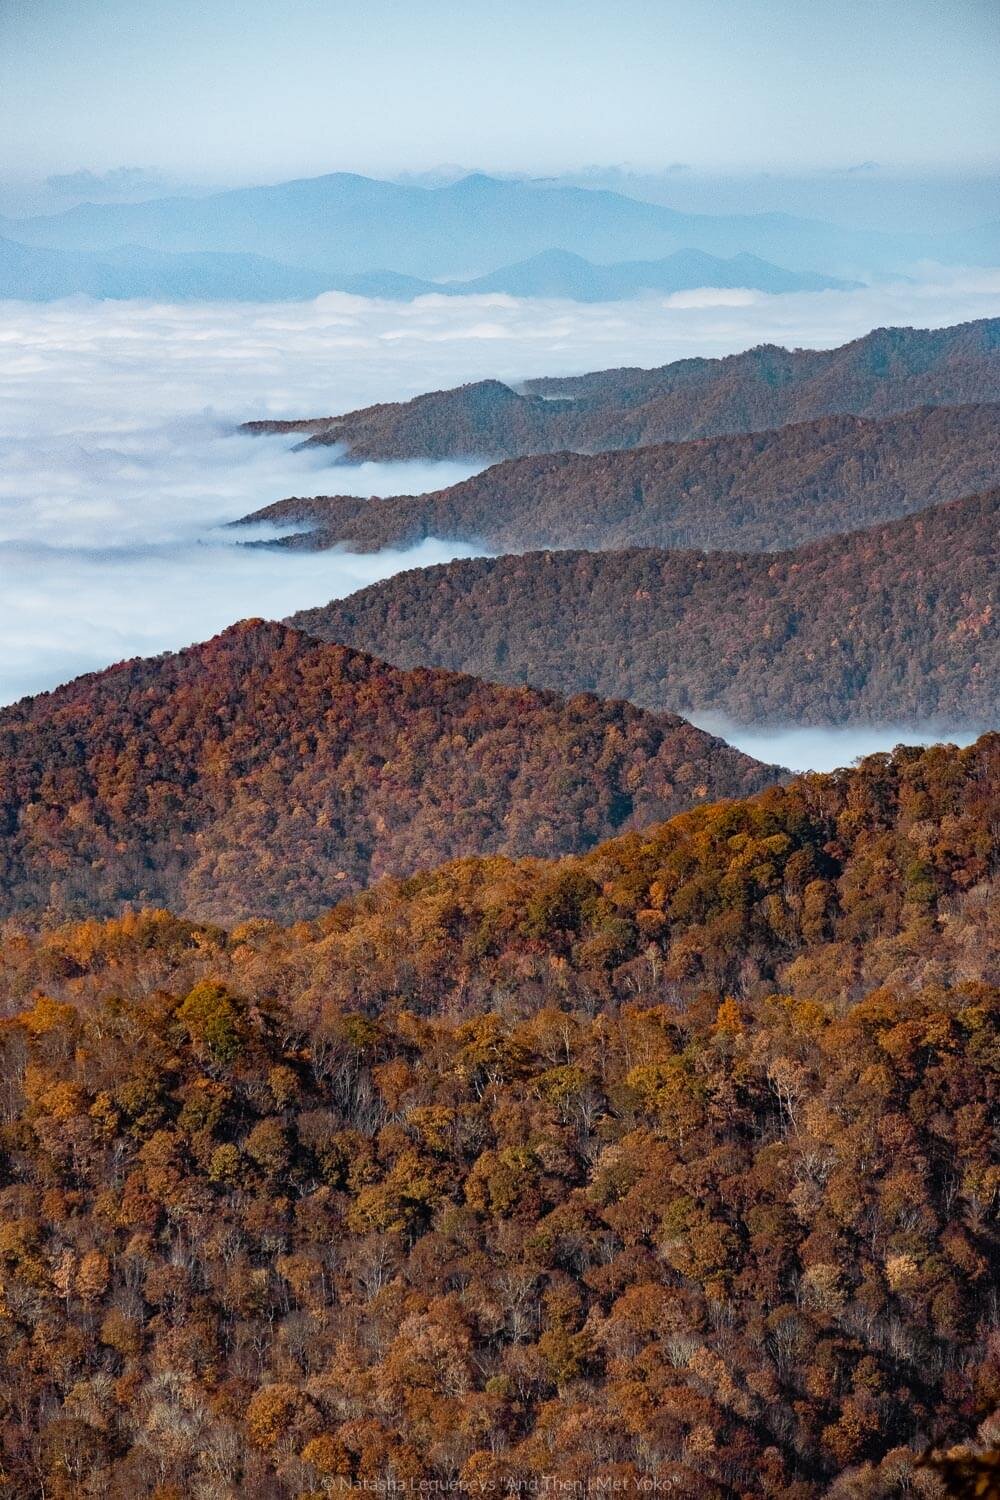 The Great Smoky Mountains. Travel photography and guide by © Natasha Lequepeys for "And Then I Met Yoko". #smokymountains #usa #travelblog #travelphotography